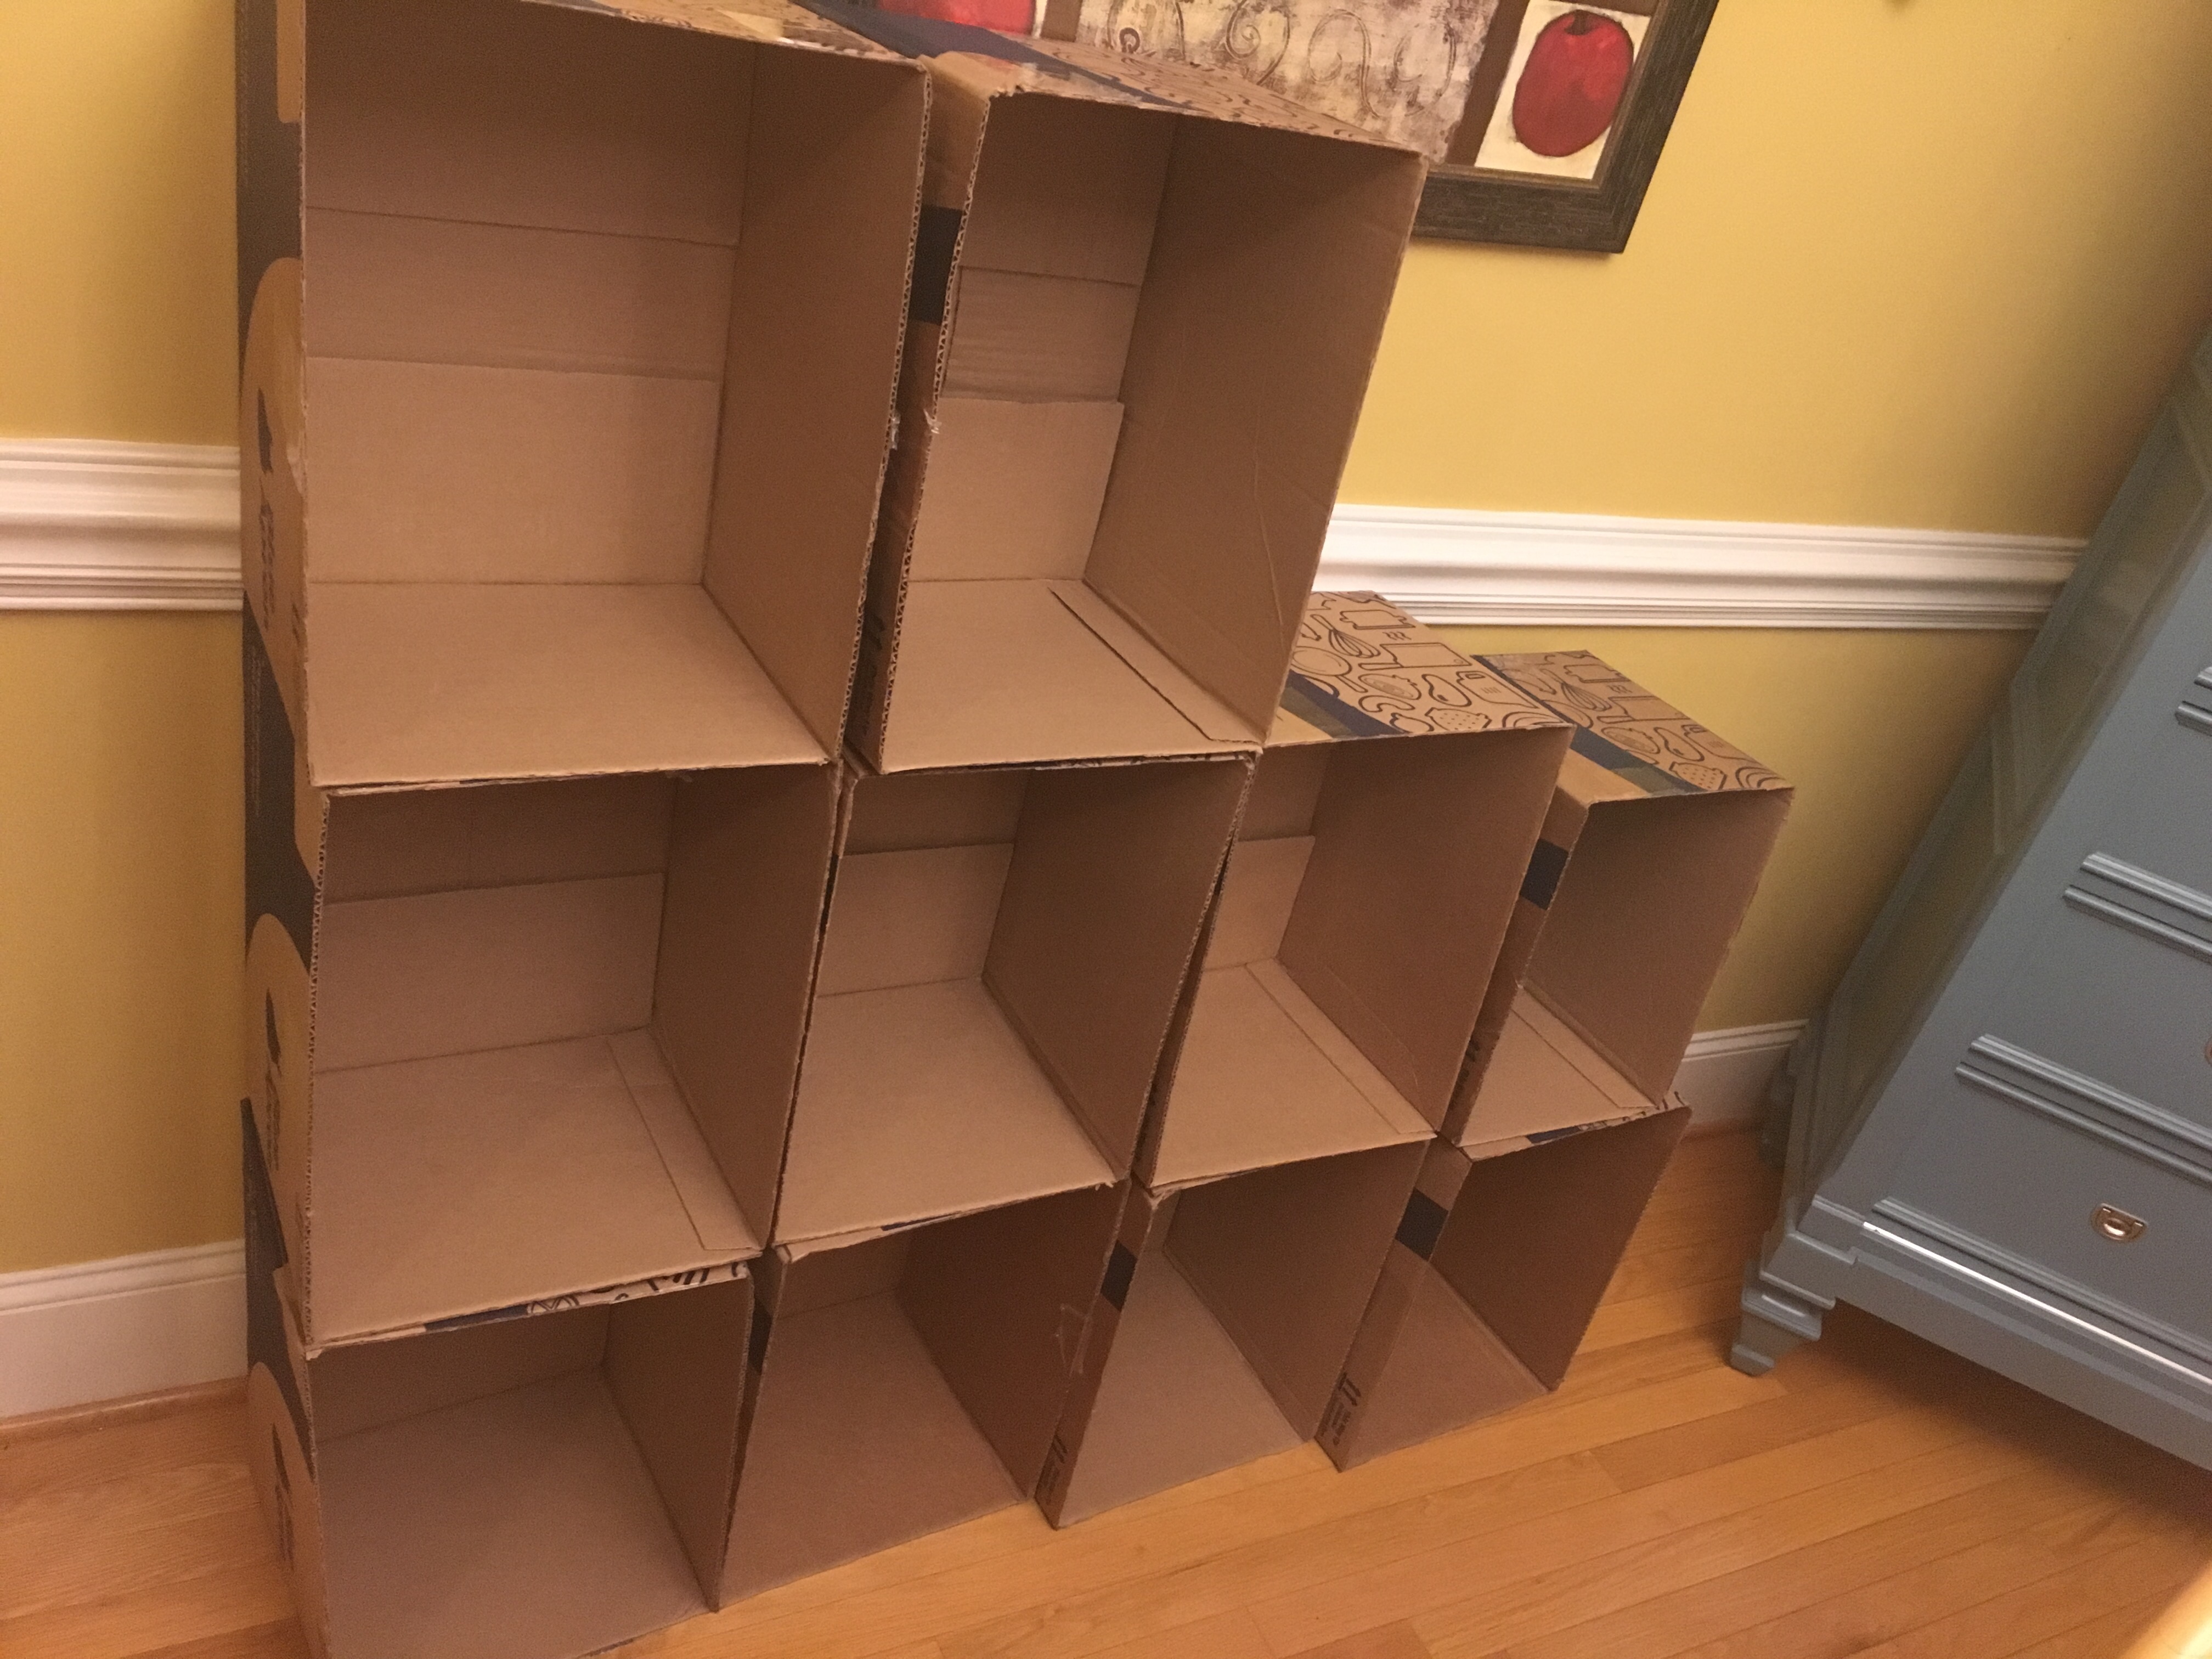 diy shelving from gasp! cardboard boxes?! – a bunch of craft